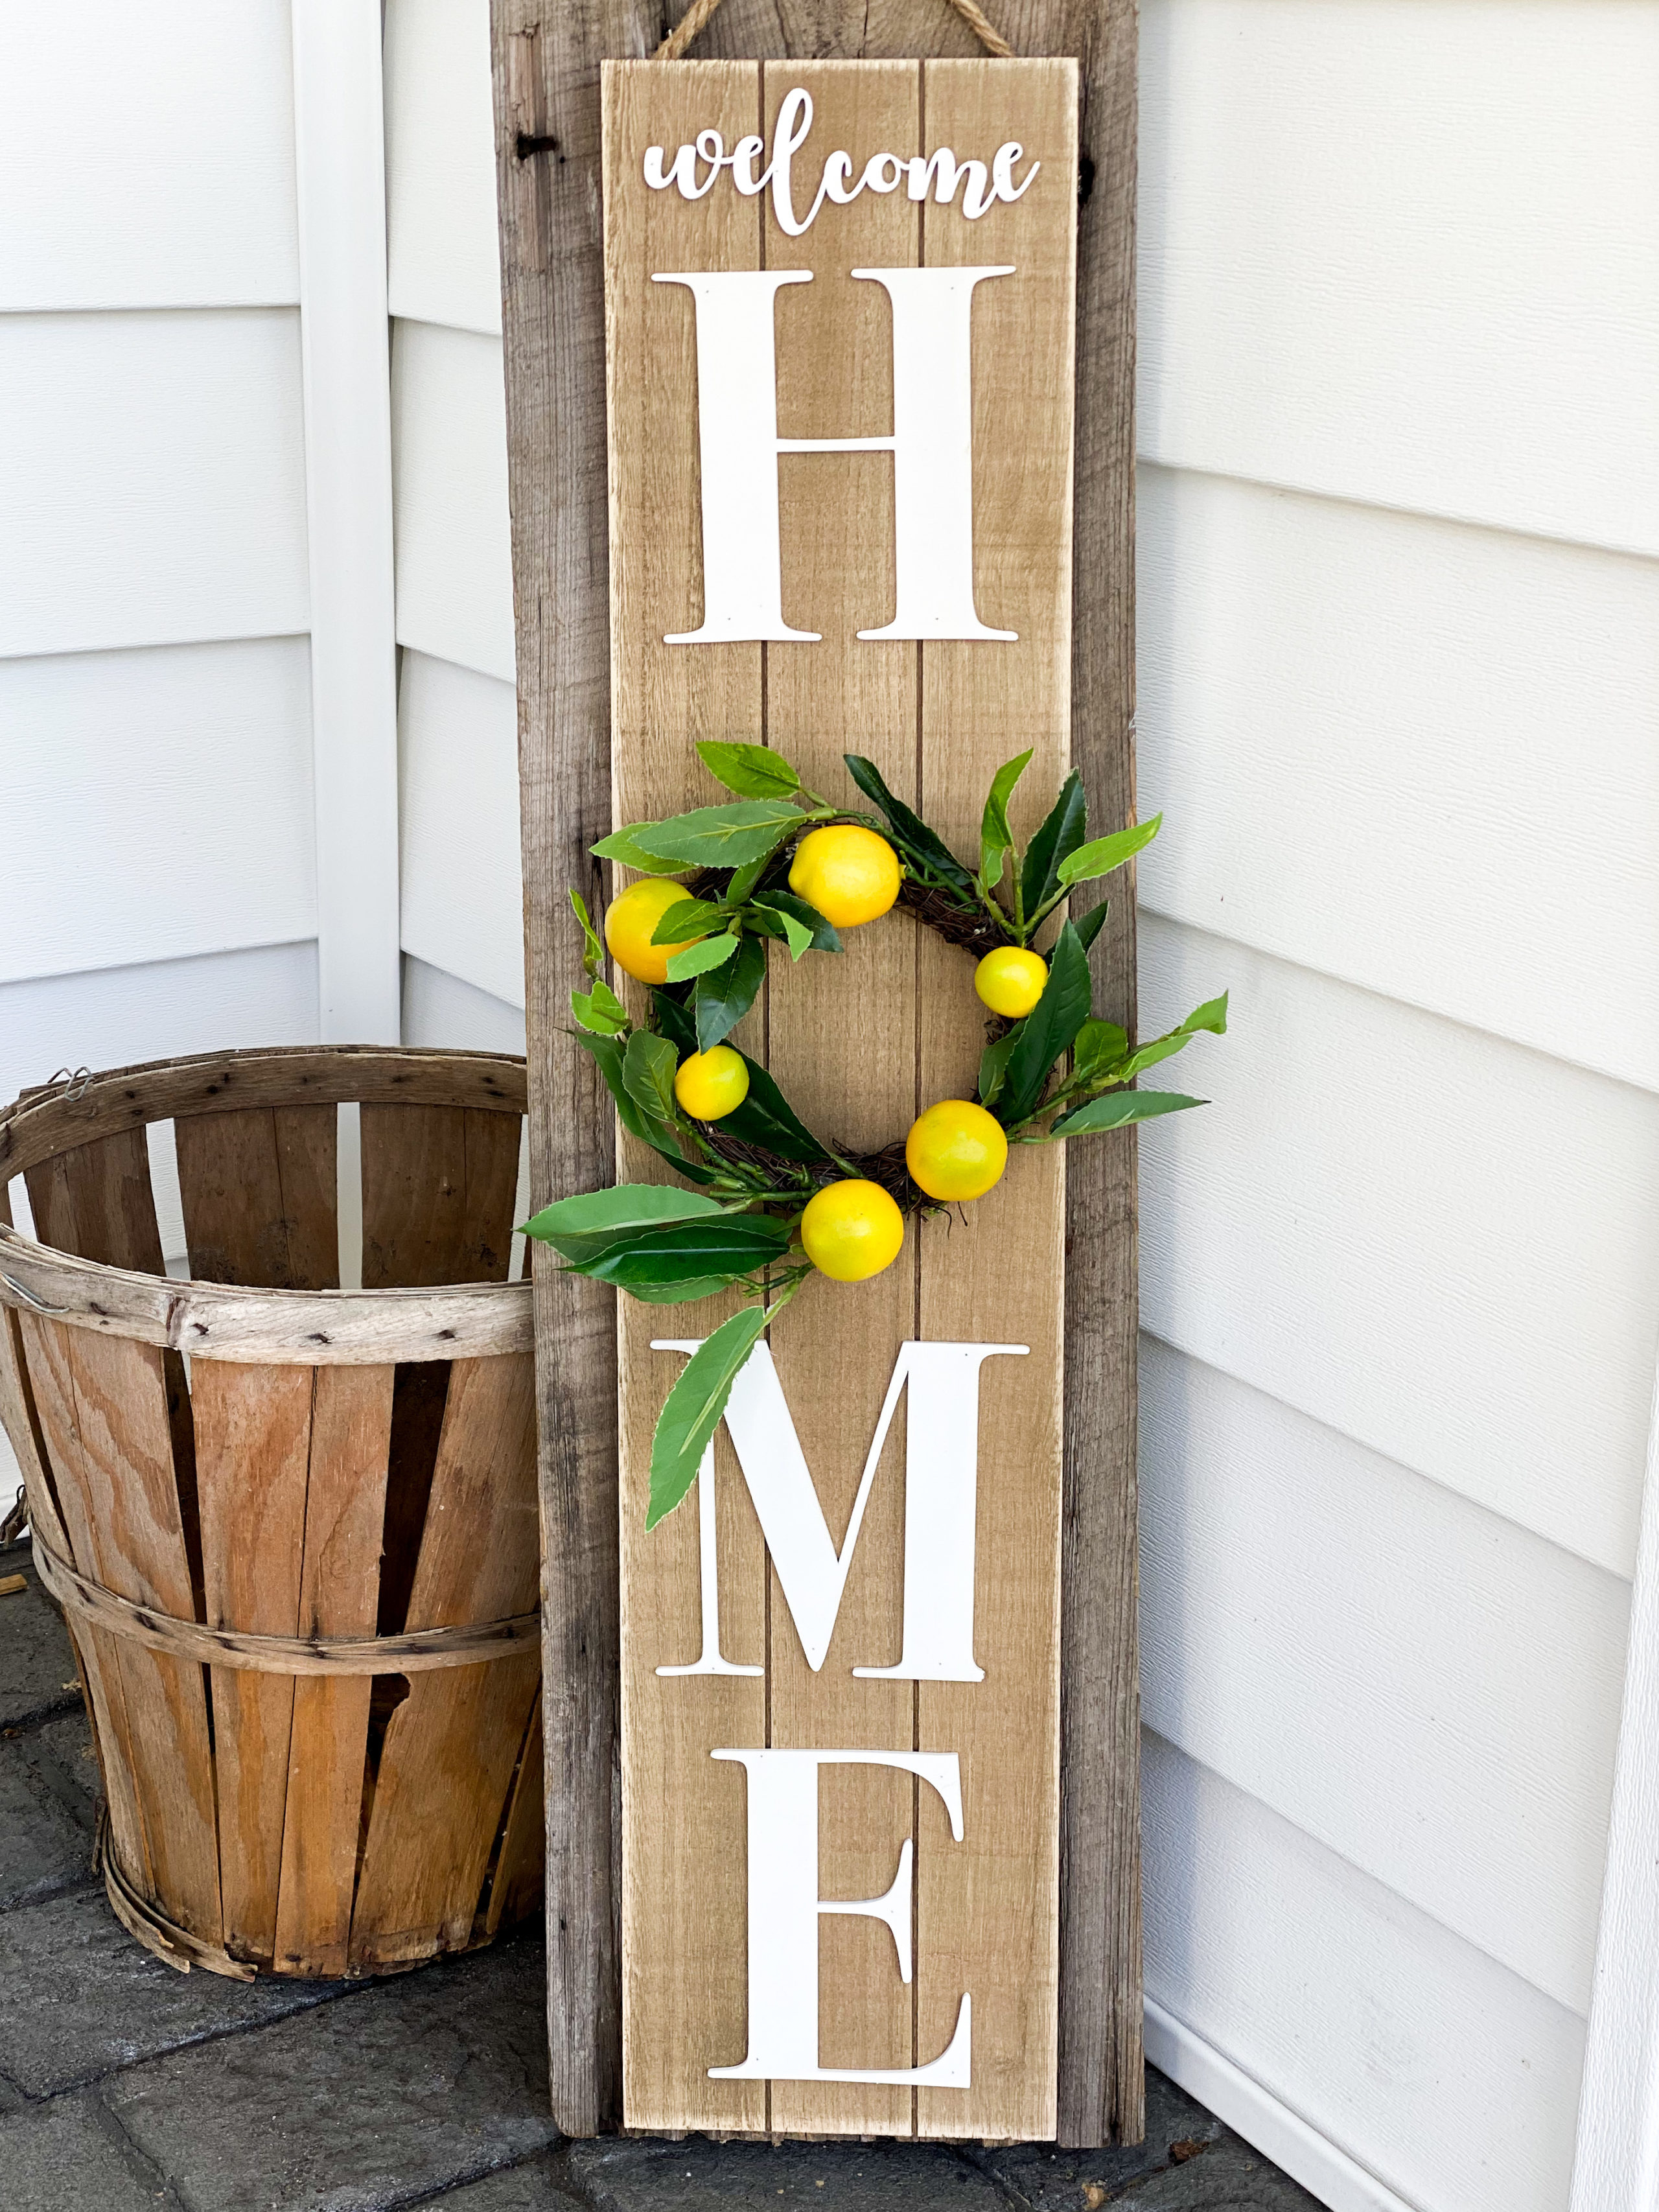 big lots welcome sign makeover using lemons for front porch